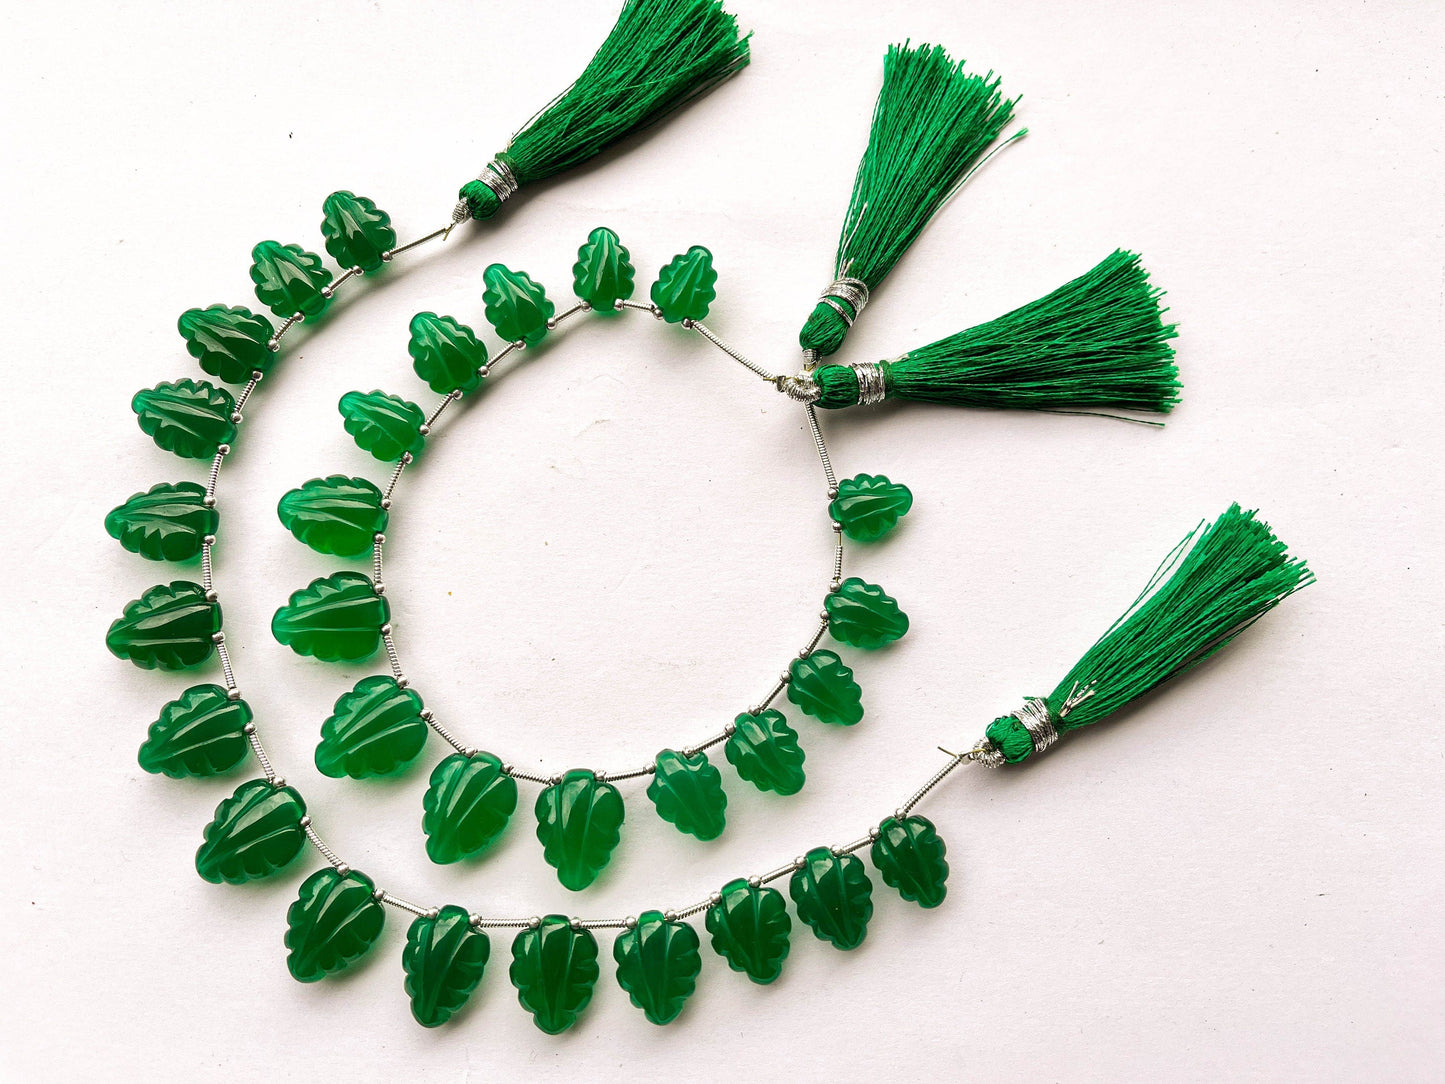 Green Onyx Leaf Carving Briolette Beads, 9x13mm to 13x16mm, 8 Inches String, 15 Pieces, Natural Gemstone Beads Beadsforyourjewelry